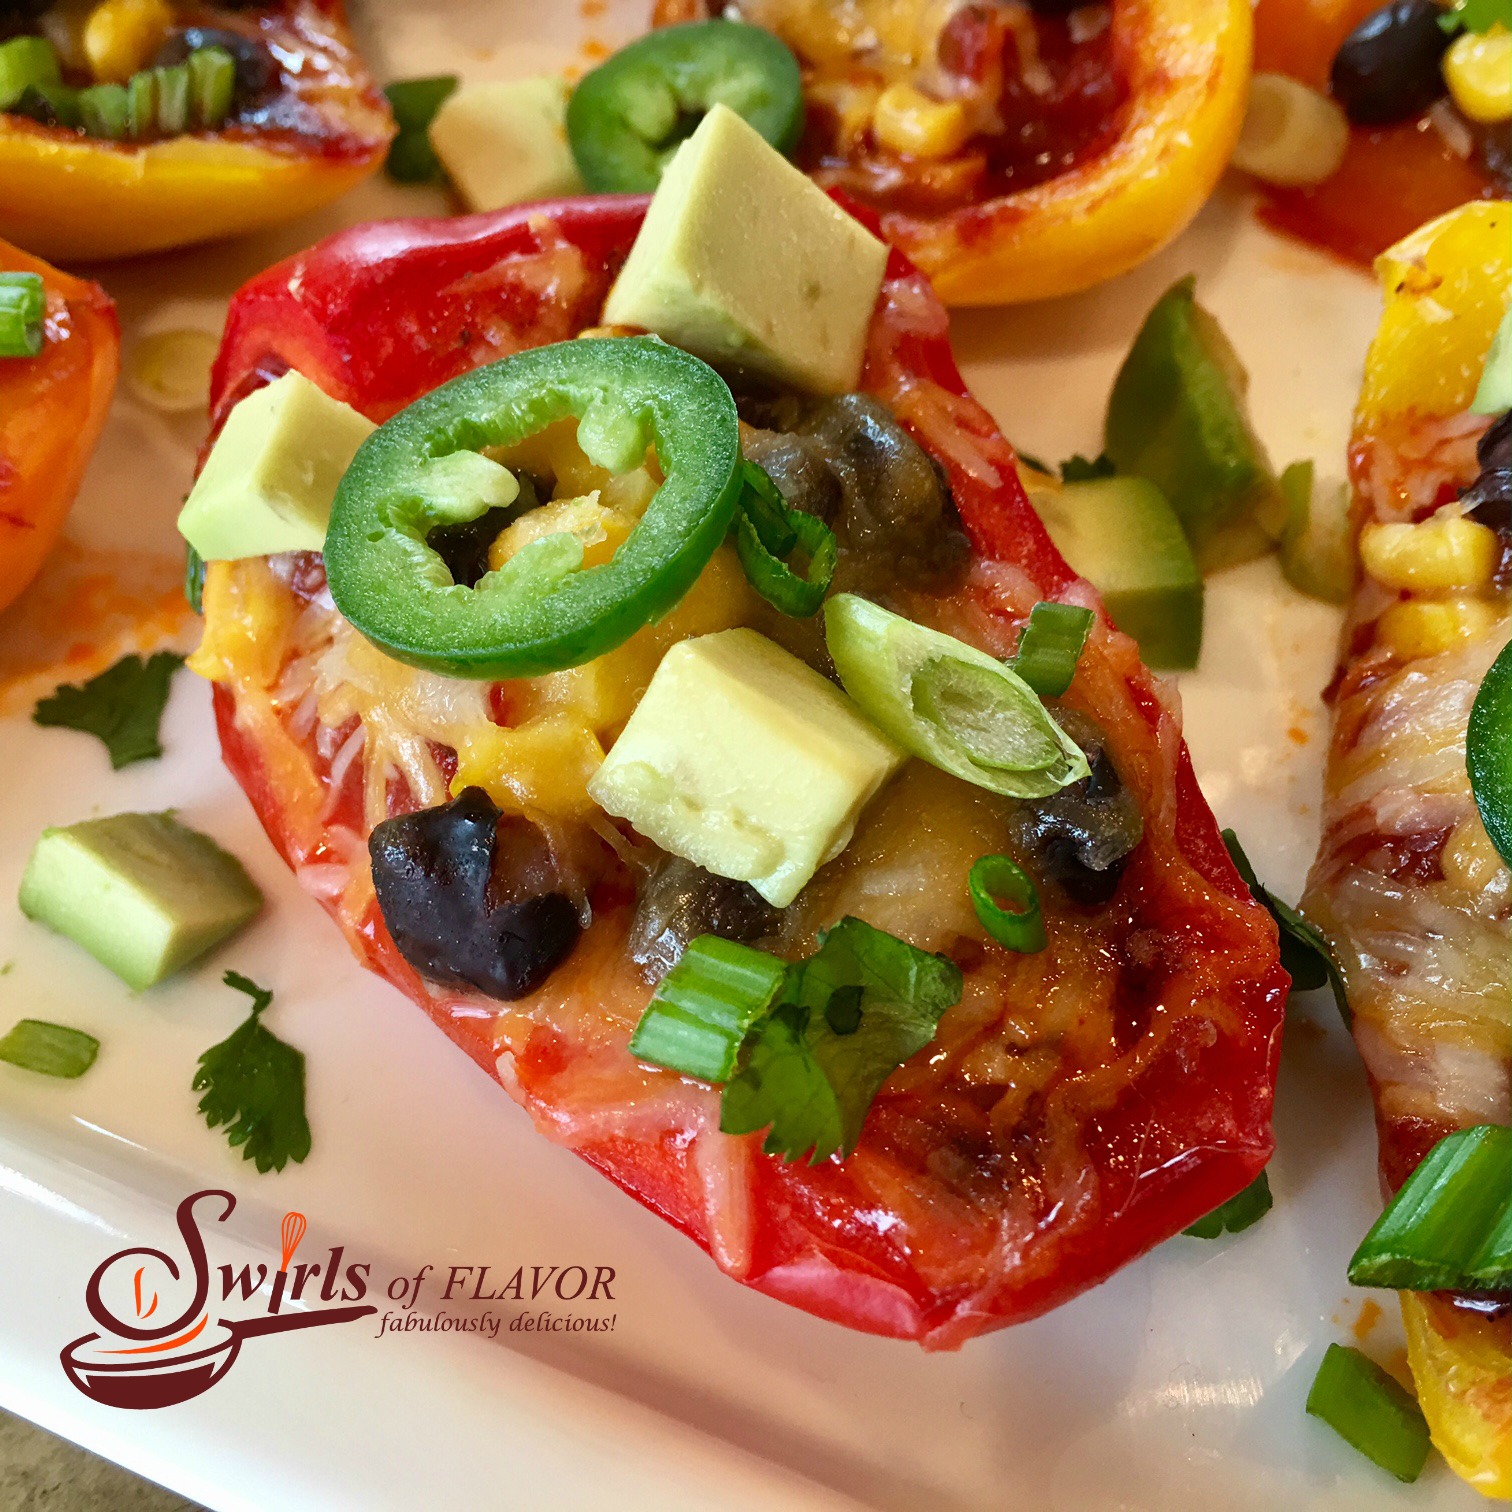 Spicy Nacho Stuffed Peppers are seasoned withÂ taco seasoningÂ and brimming with salsa, black beans, corn, avocado, jalapeno and cheesyÂ goodness!Â #nachos #easyrecipe #appetizer #nachosrecipe #lowfat #glutenfree #cheese #stuffedpeppers #swirlsofflavor